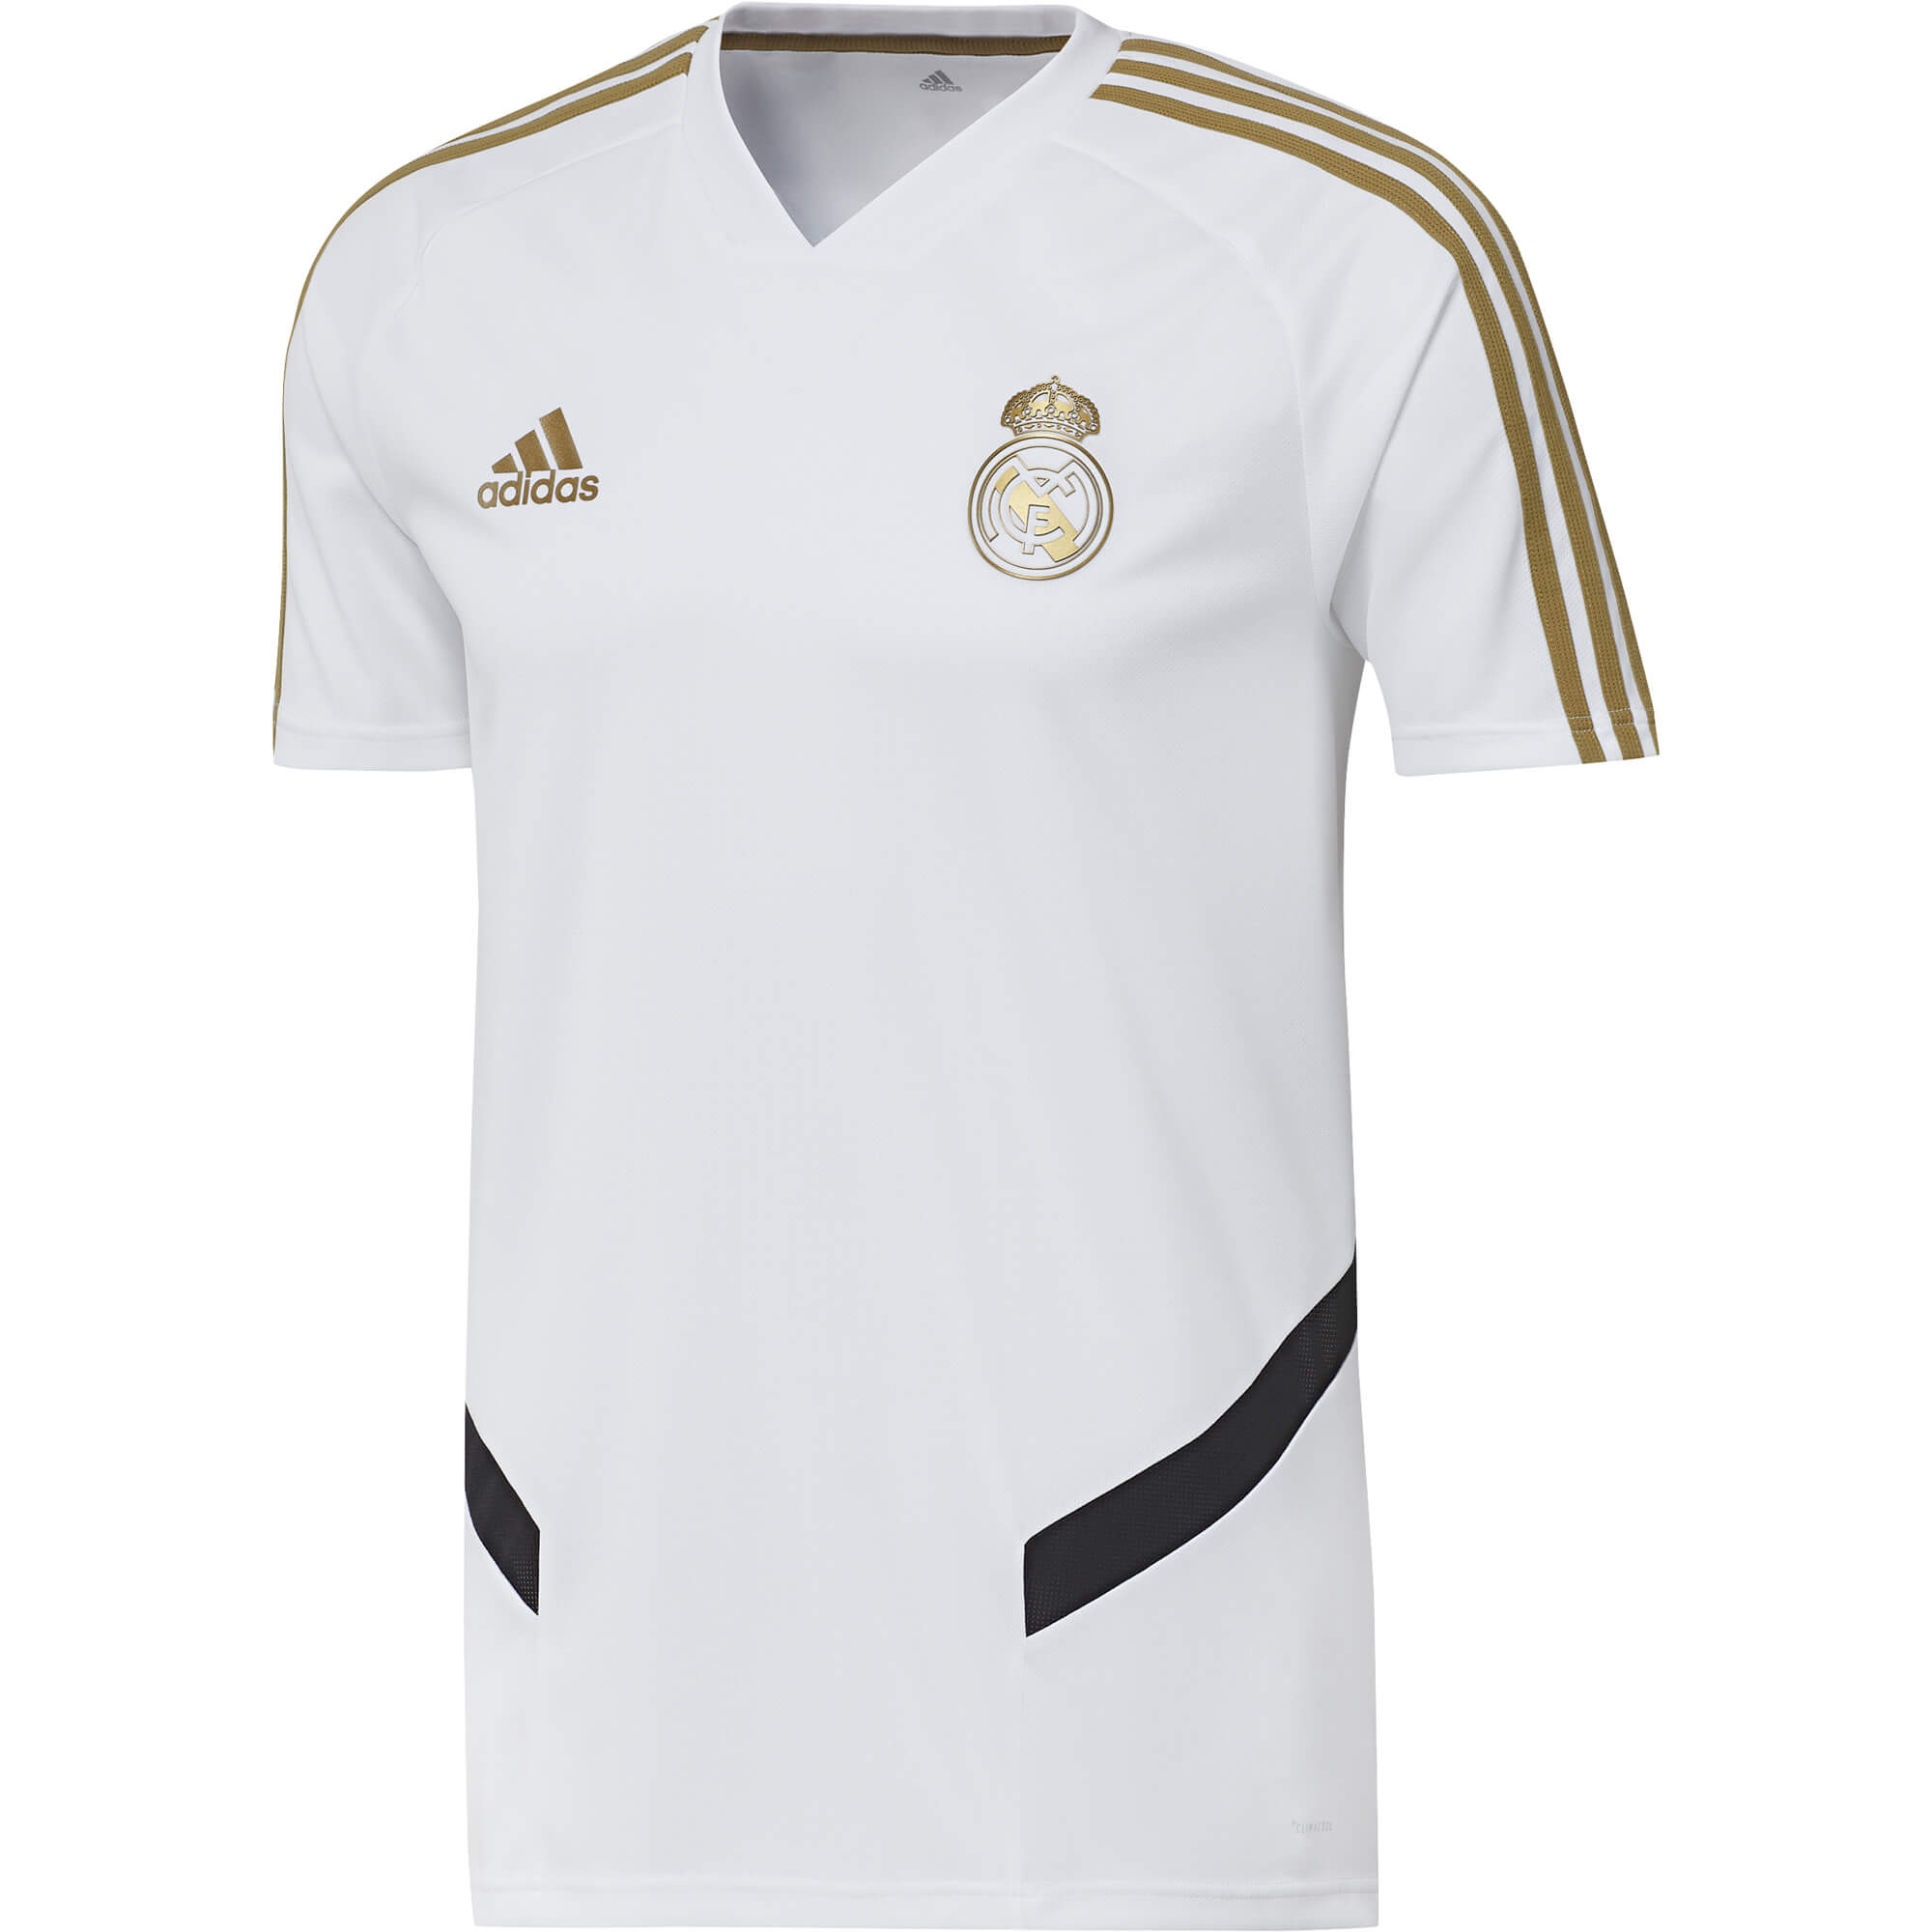 ADIDAS REAL MADRID MAILLOT ENTRAINEMENT BLANC 2019/2020